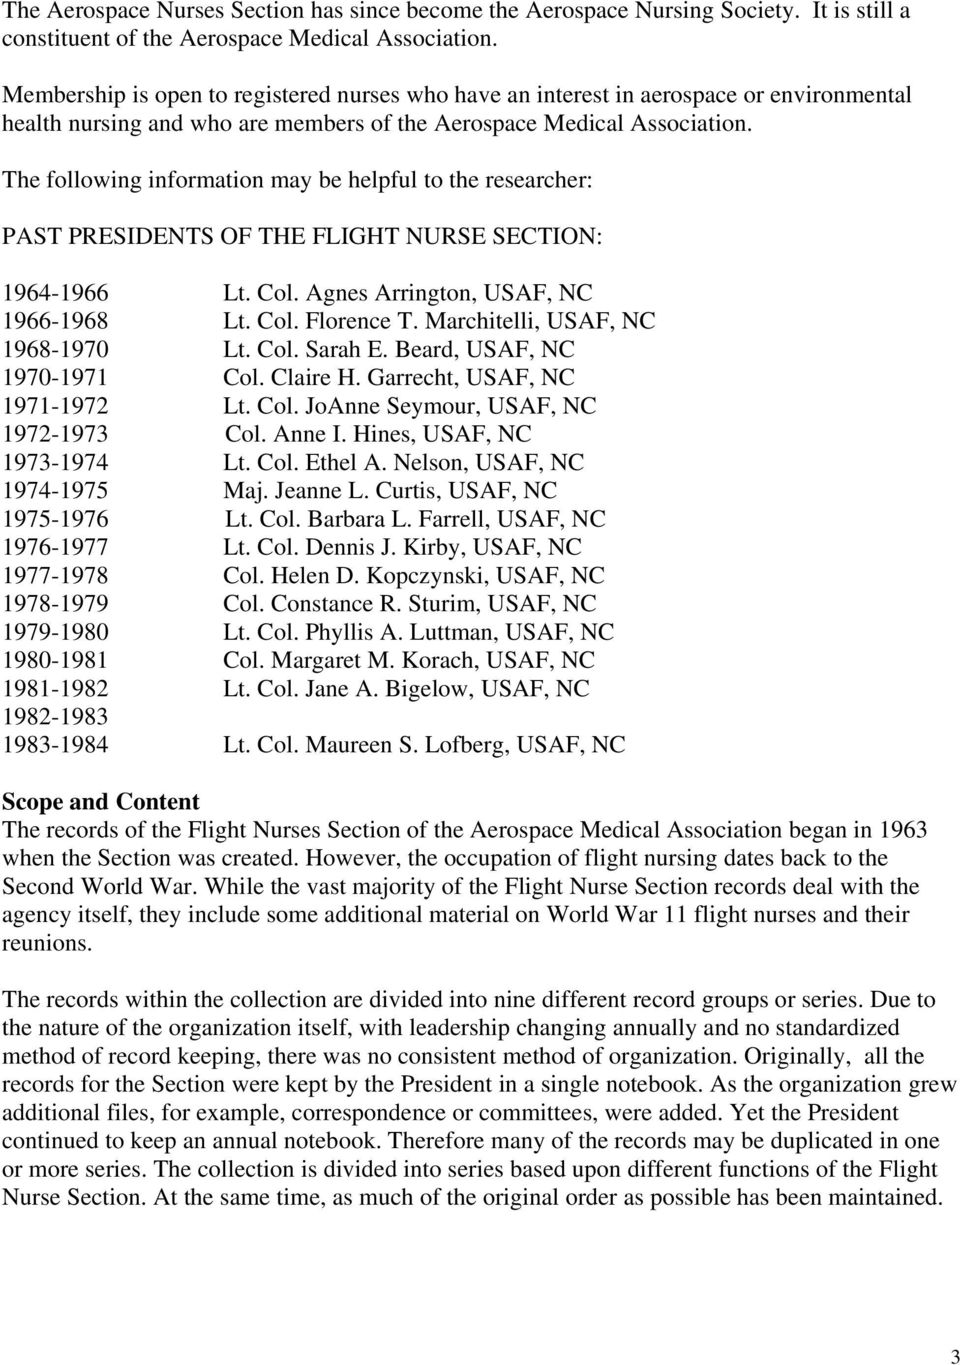 The following information may be helpful to the researcher: PAST PRESIDENTS OF THE FLIGHT NURSE SECTION: 1964-1966 Lt. Col. Agnes Arrington, USAF, NC 1966-1968 Lt. Col. Florence T.